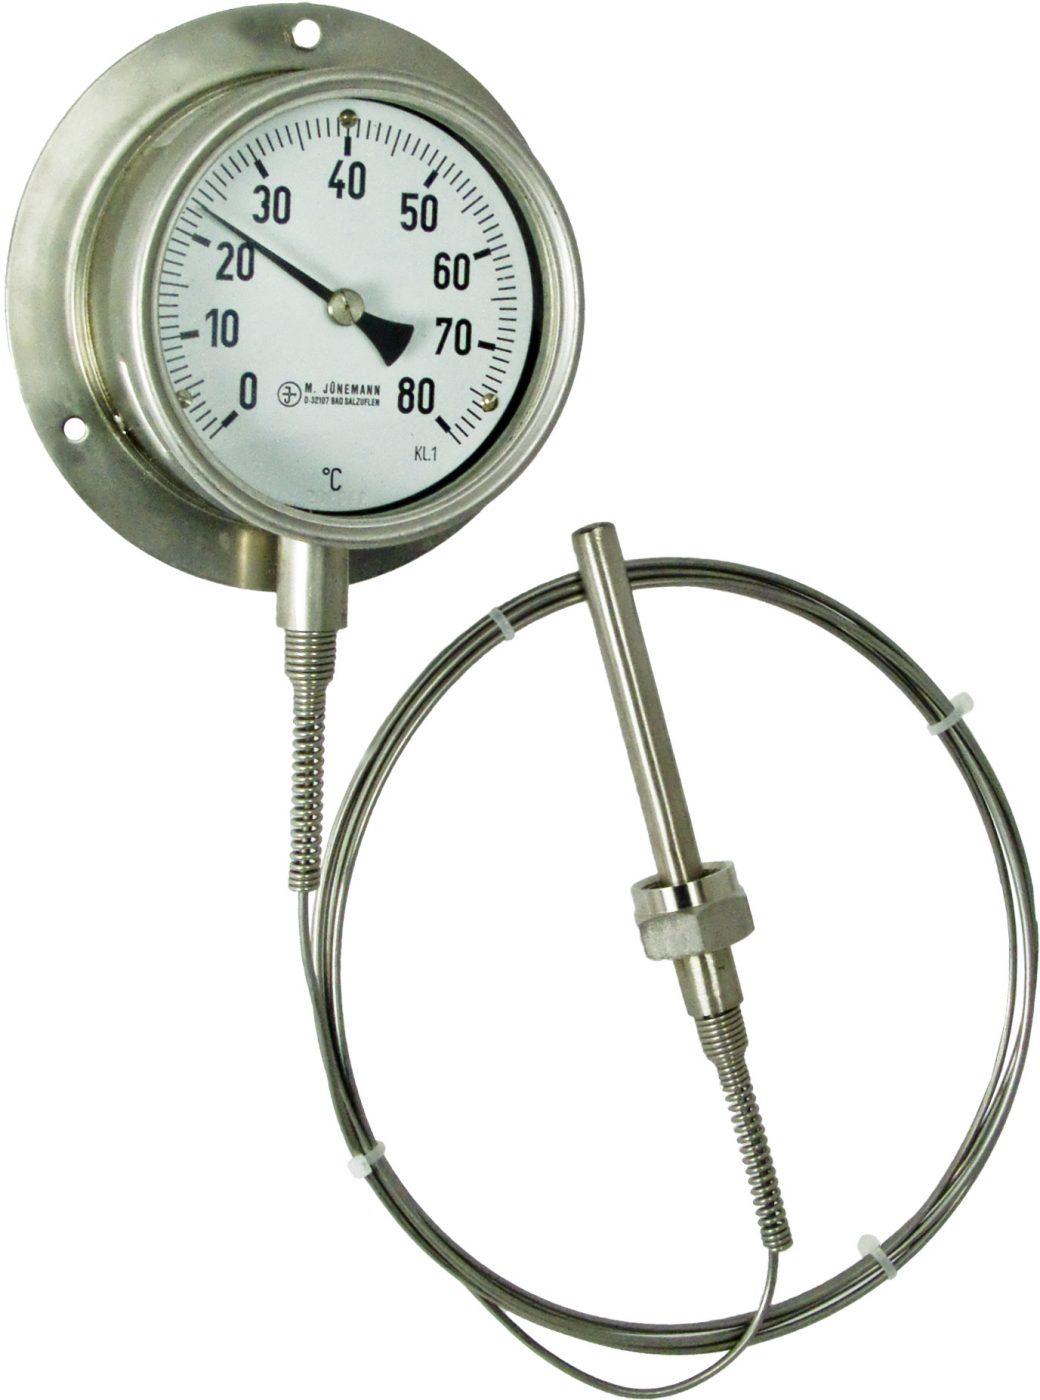 Jünemann Instruments - Gas expansion thermometers